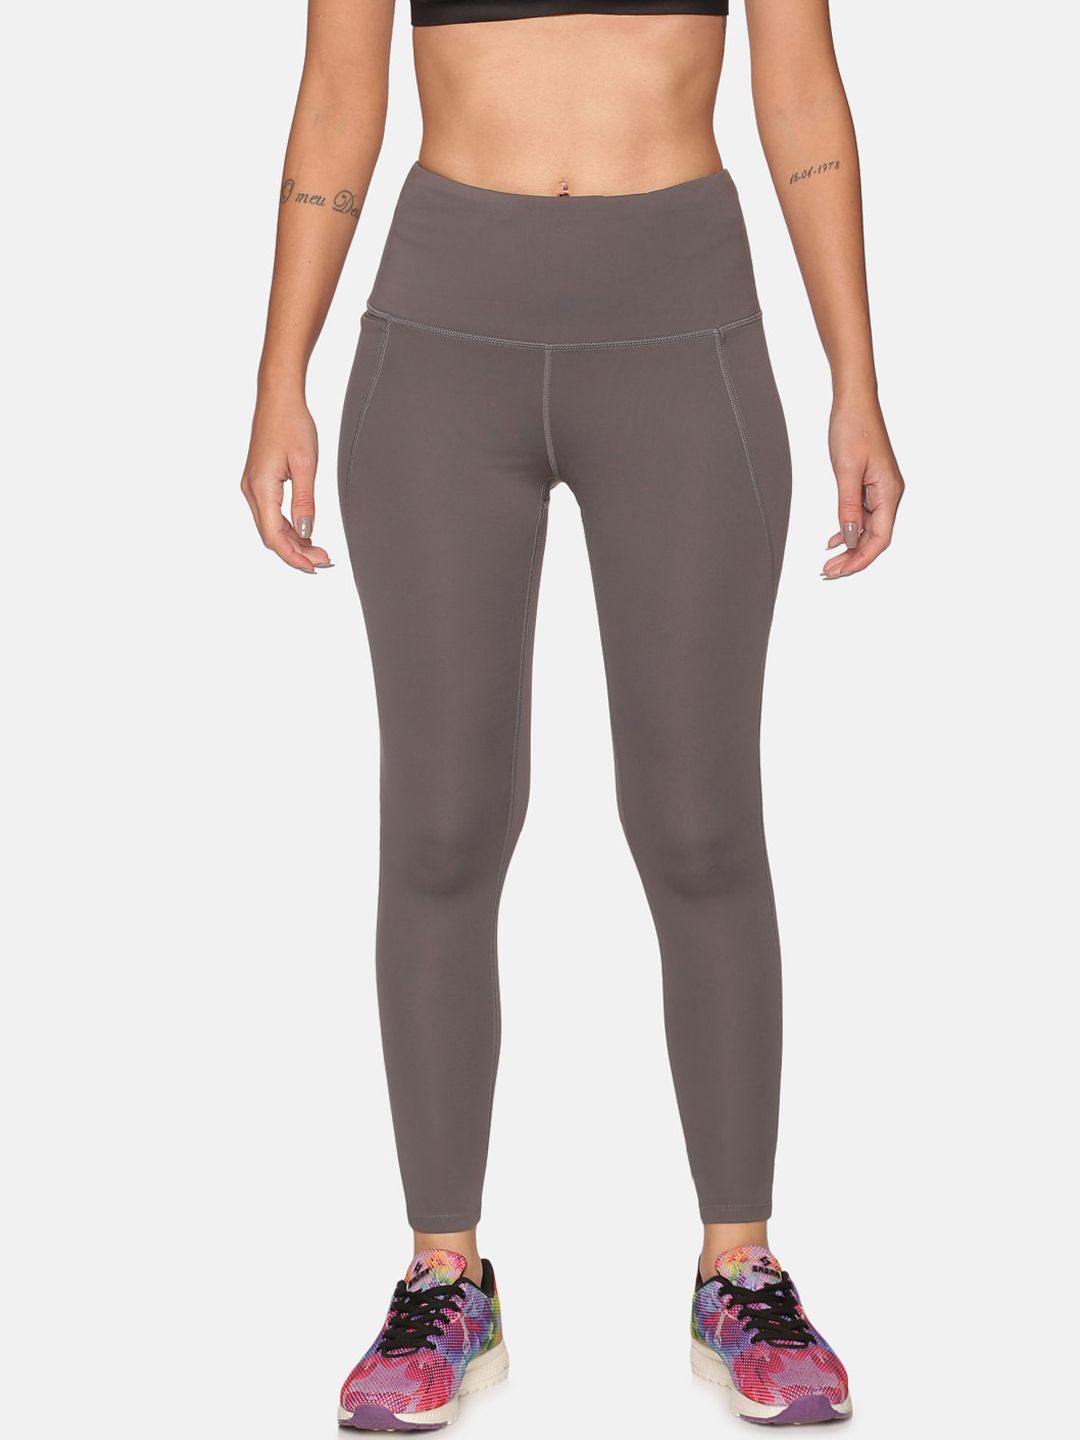 BlissClub Women Light Grey Super Stretchy and High Waisted The Ultimate Tights Price in India